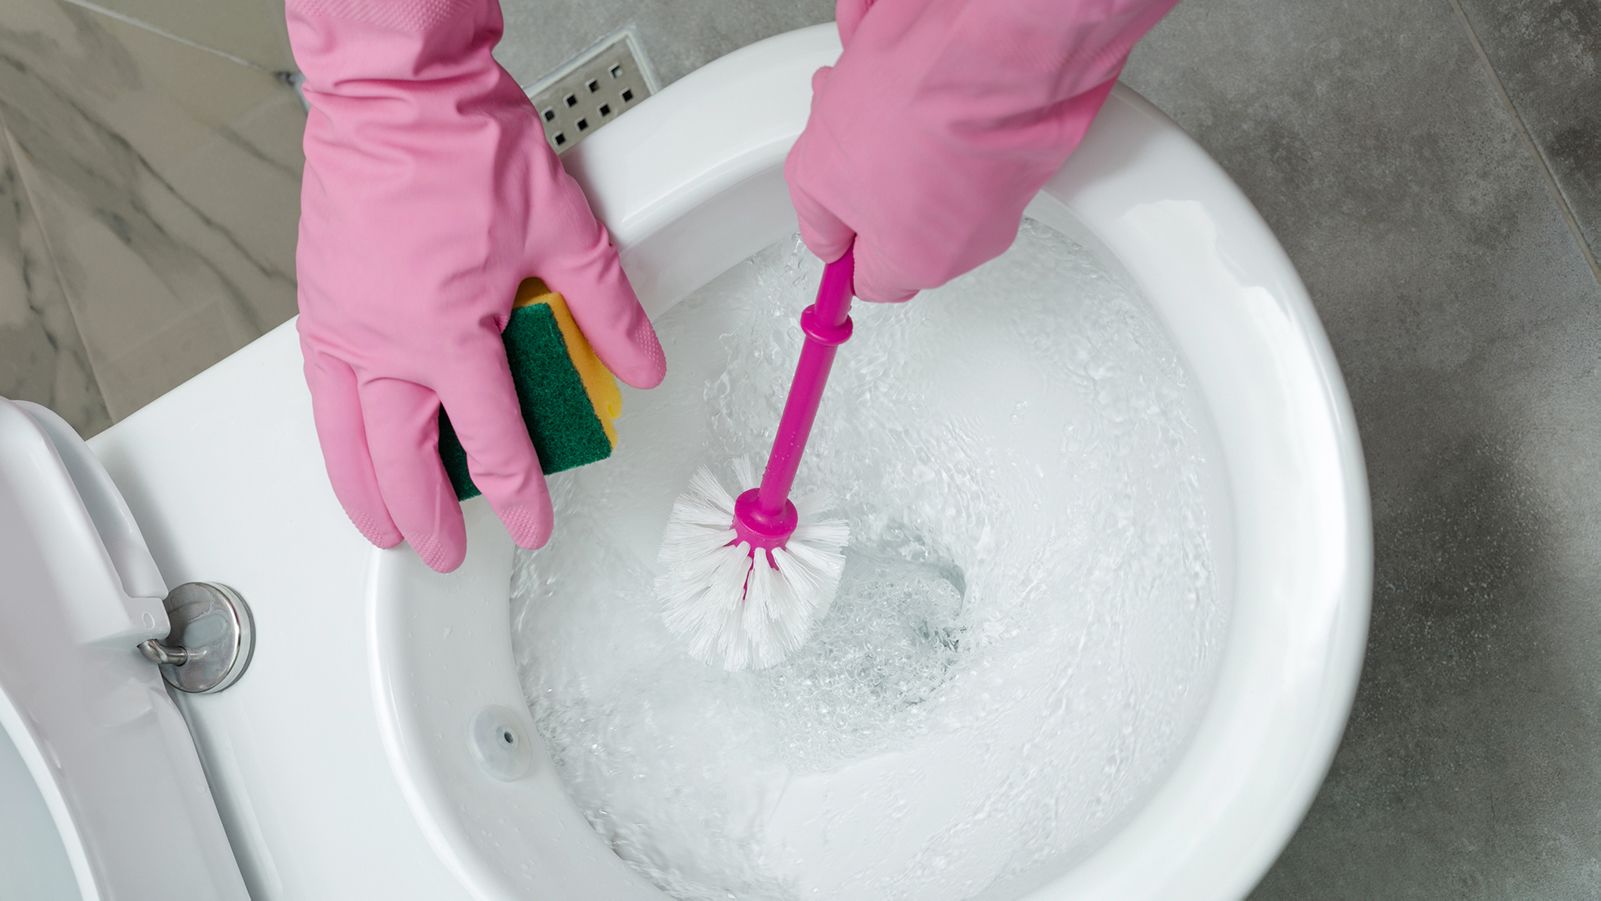 MR DIY - Quick and easy toilet bubble cleaner effective in